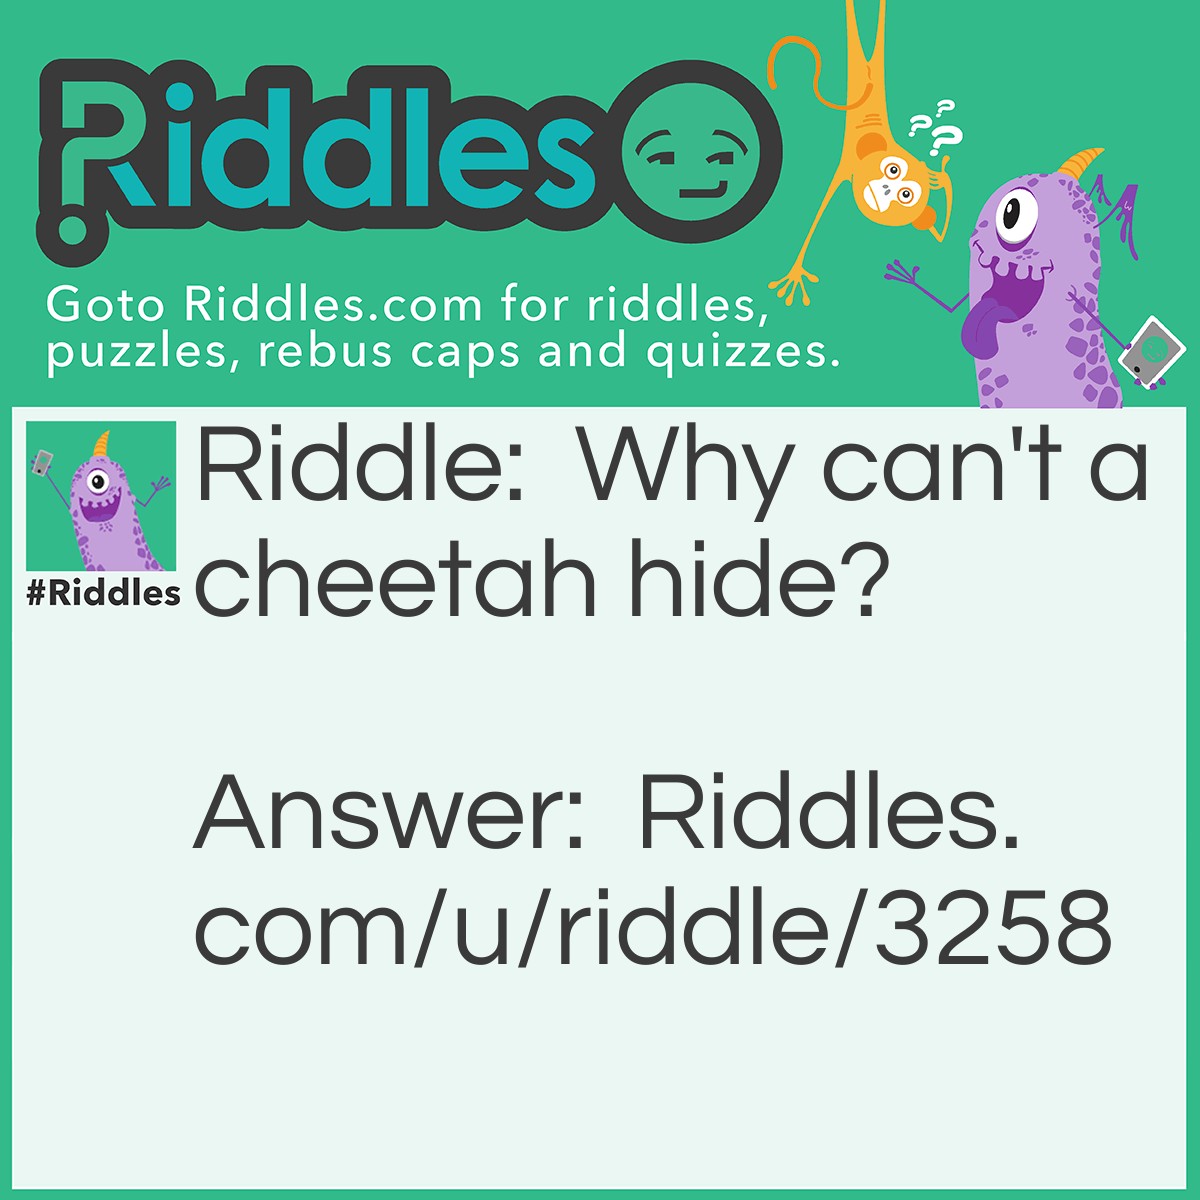 Riddle: Why can't a cheetah hide? Answer: Because it is spotted!